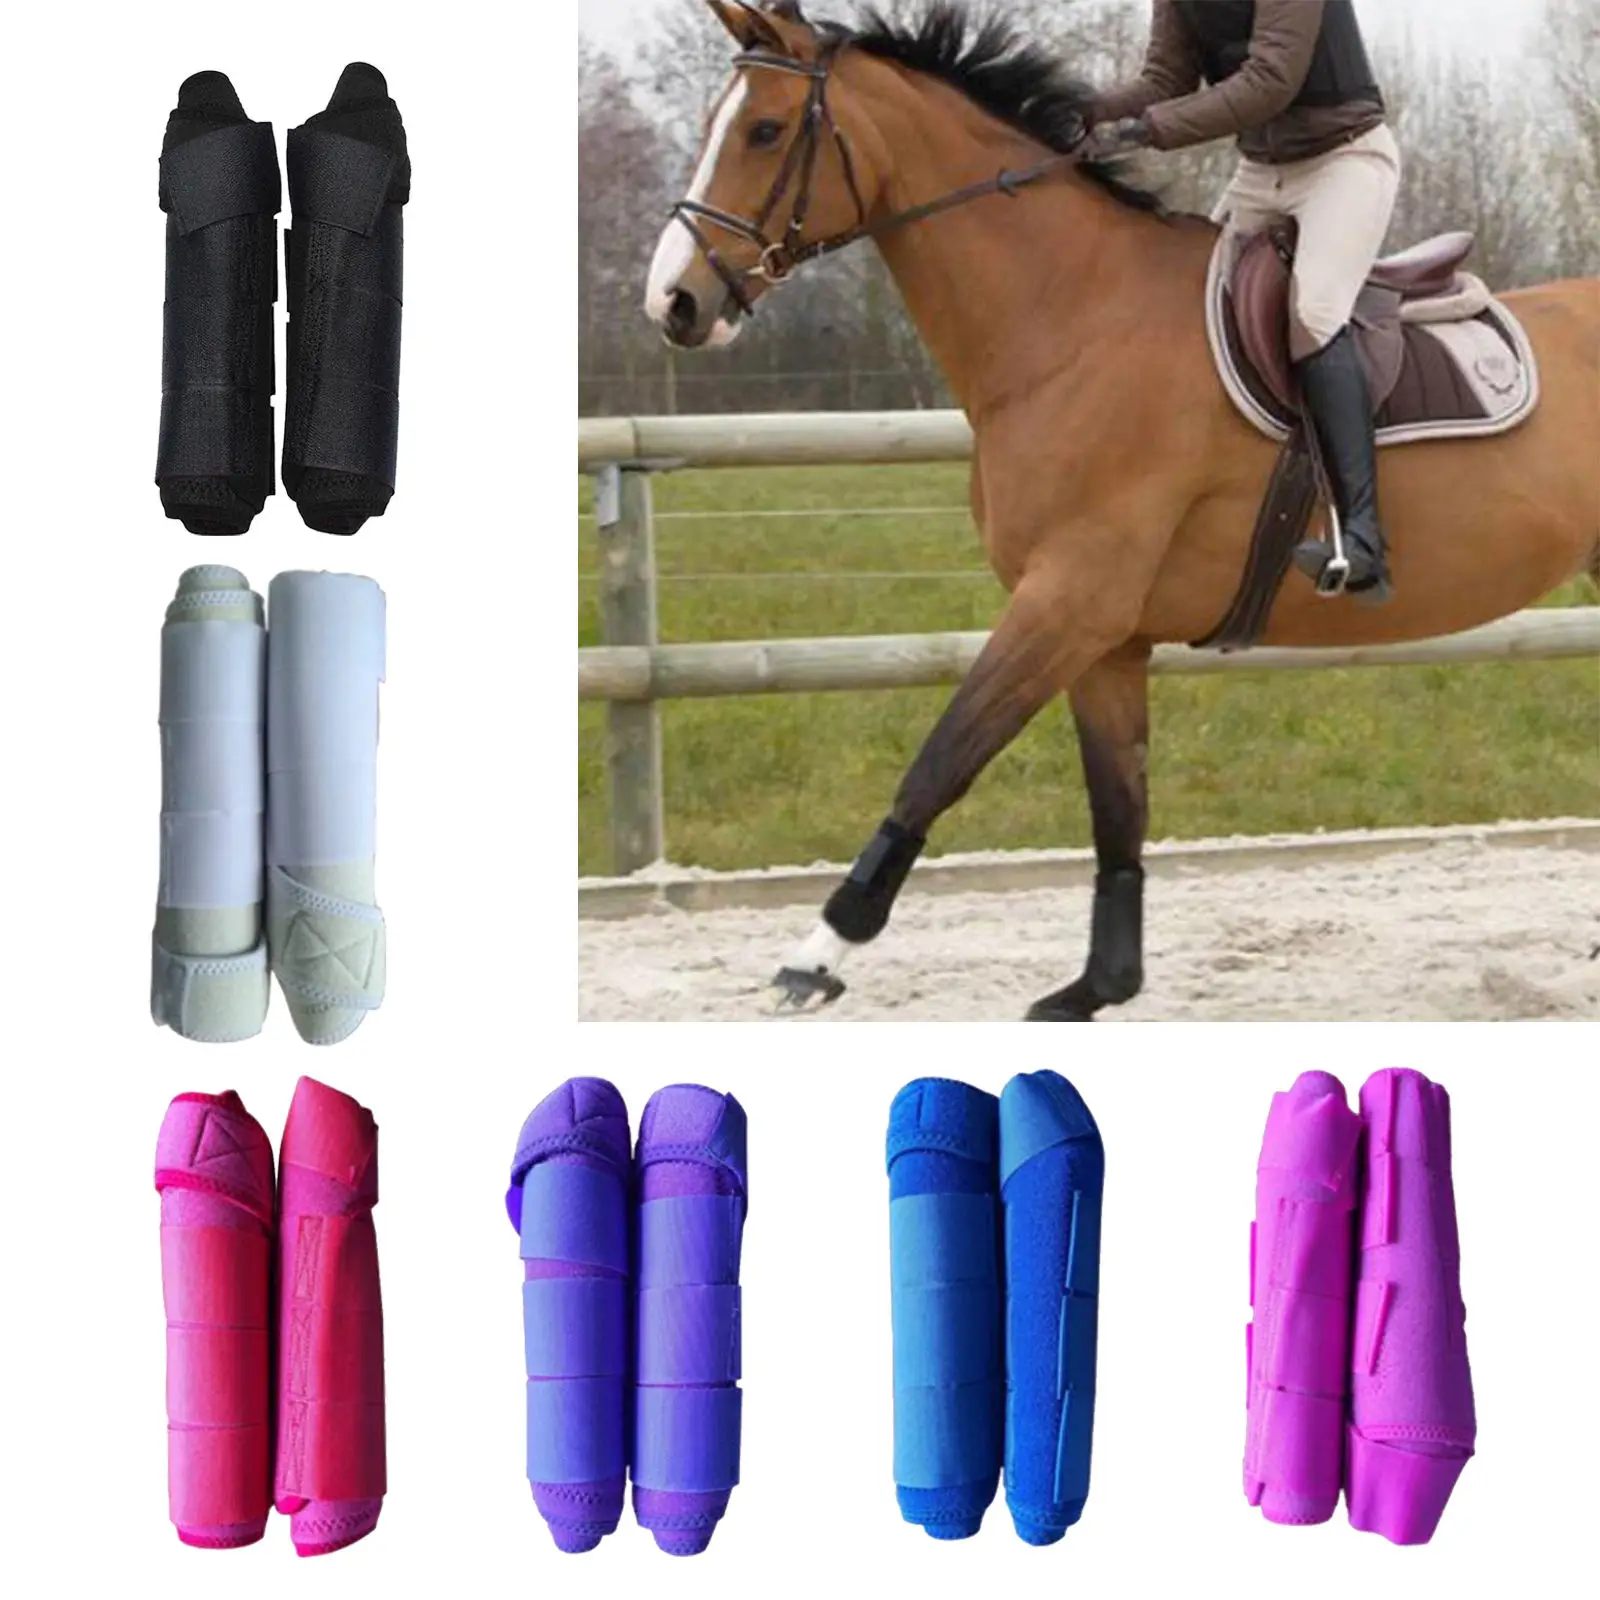 Horse Tendon Boots Equestrain Front Rear Leg Protect Support Brushing Boot Equine Dressage Boots for Training Jumping Riding